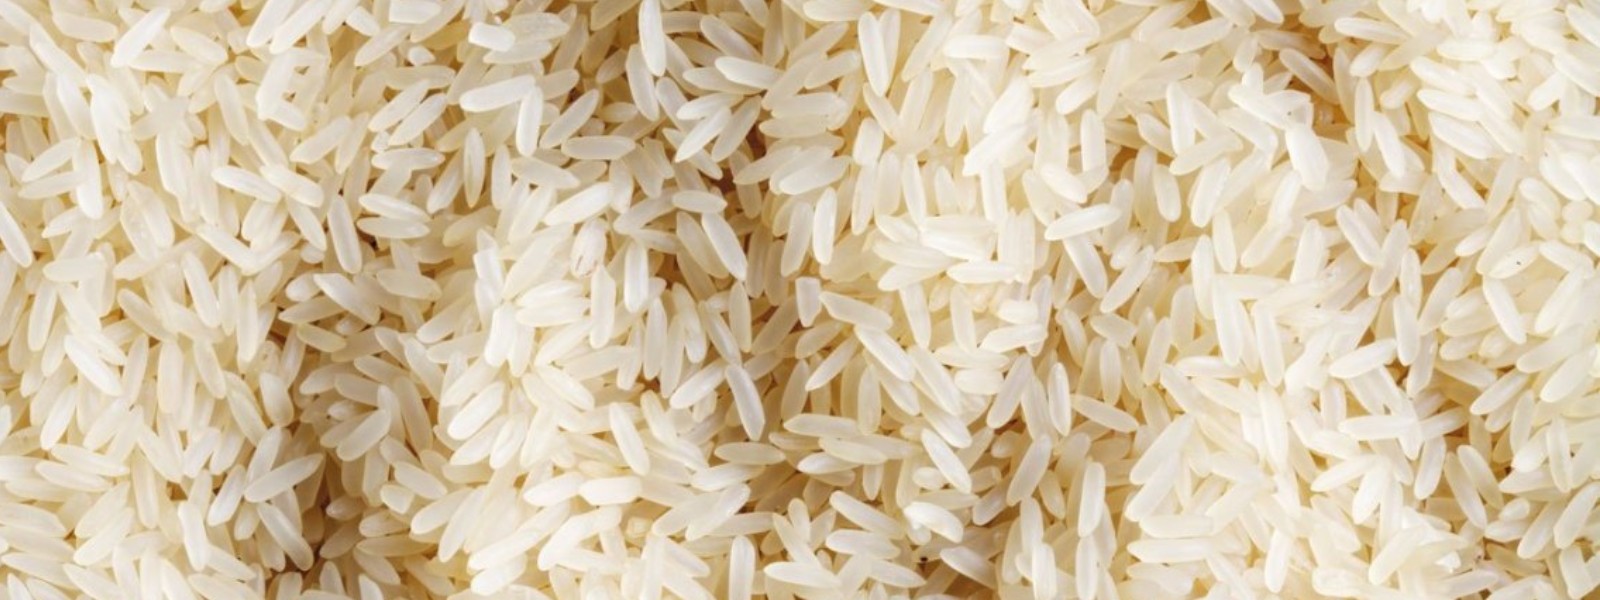 Cabinet approves to import Nadu & Short Grain rice